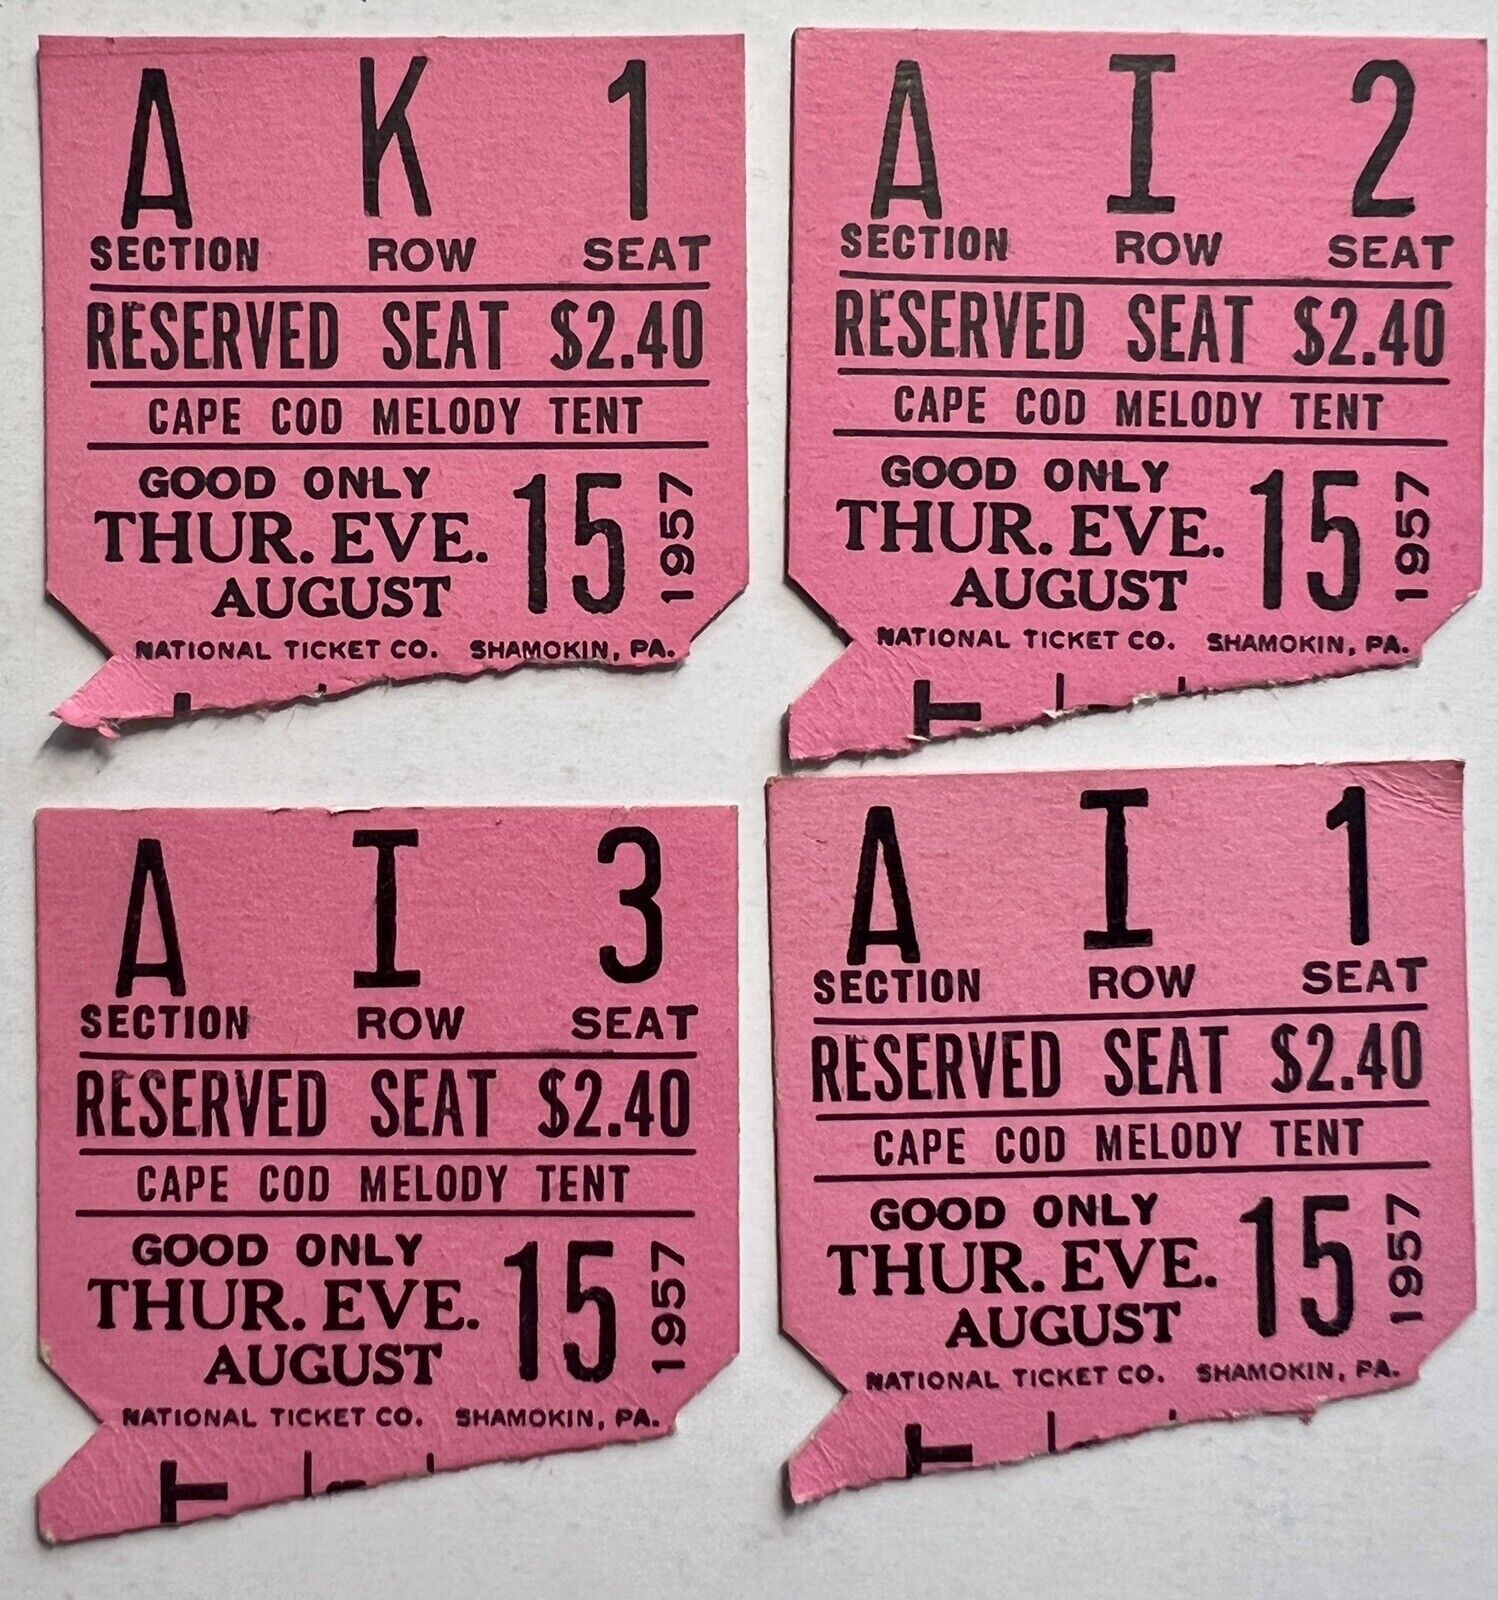 Hyannis MA Cape Cod Melody Tent 1957 Ticket Stubs Vintage Collectible